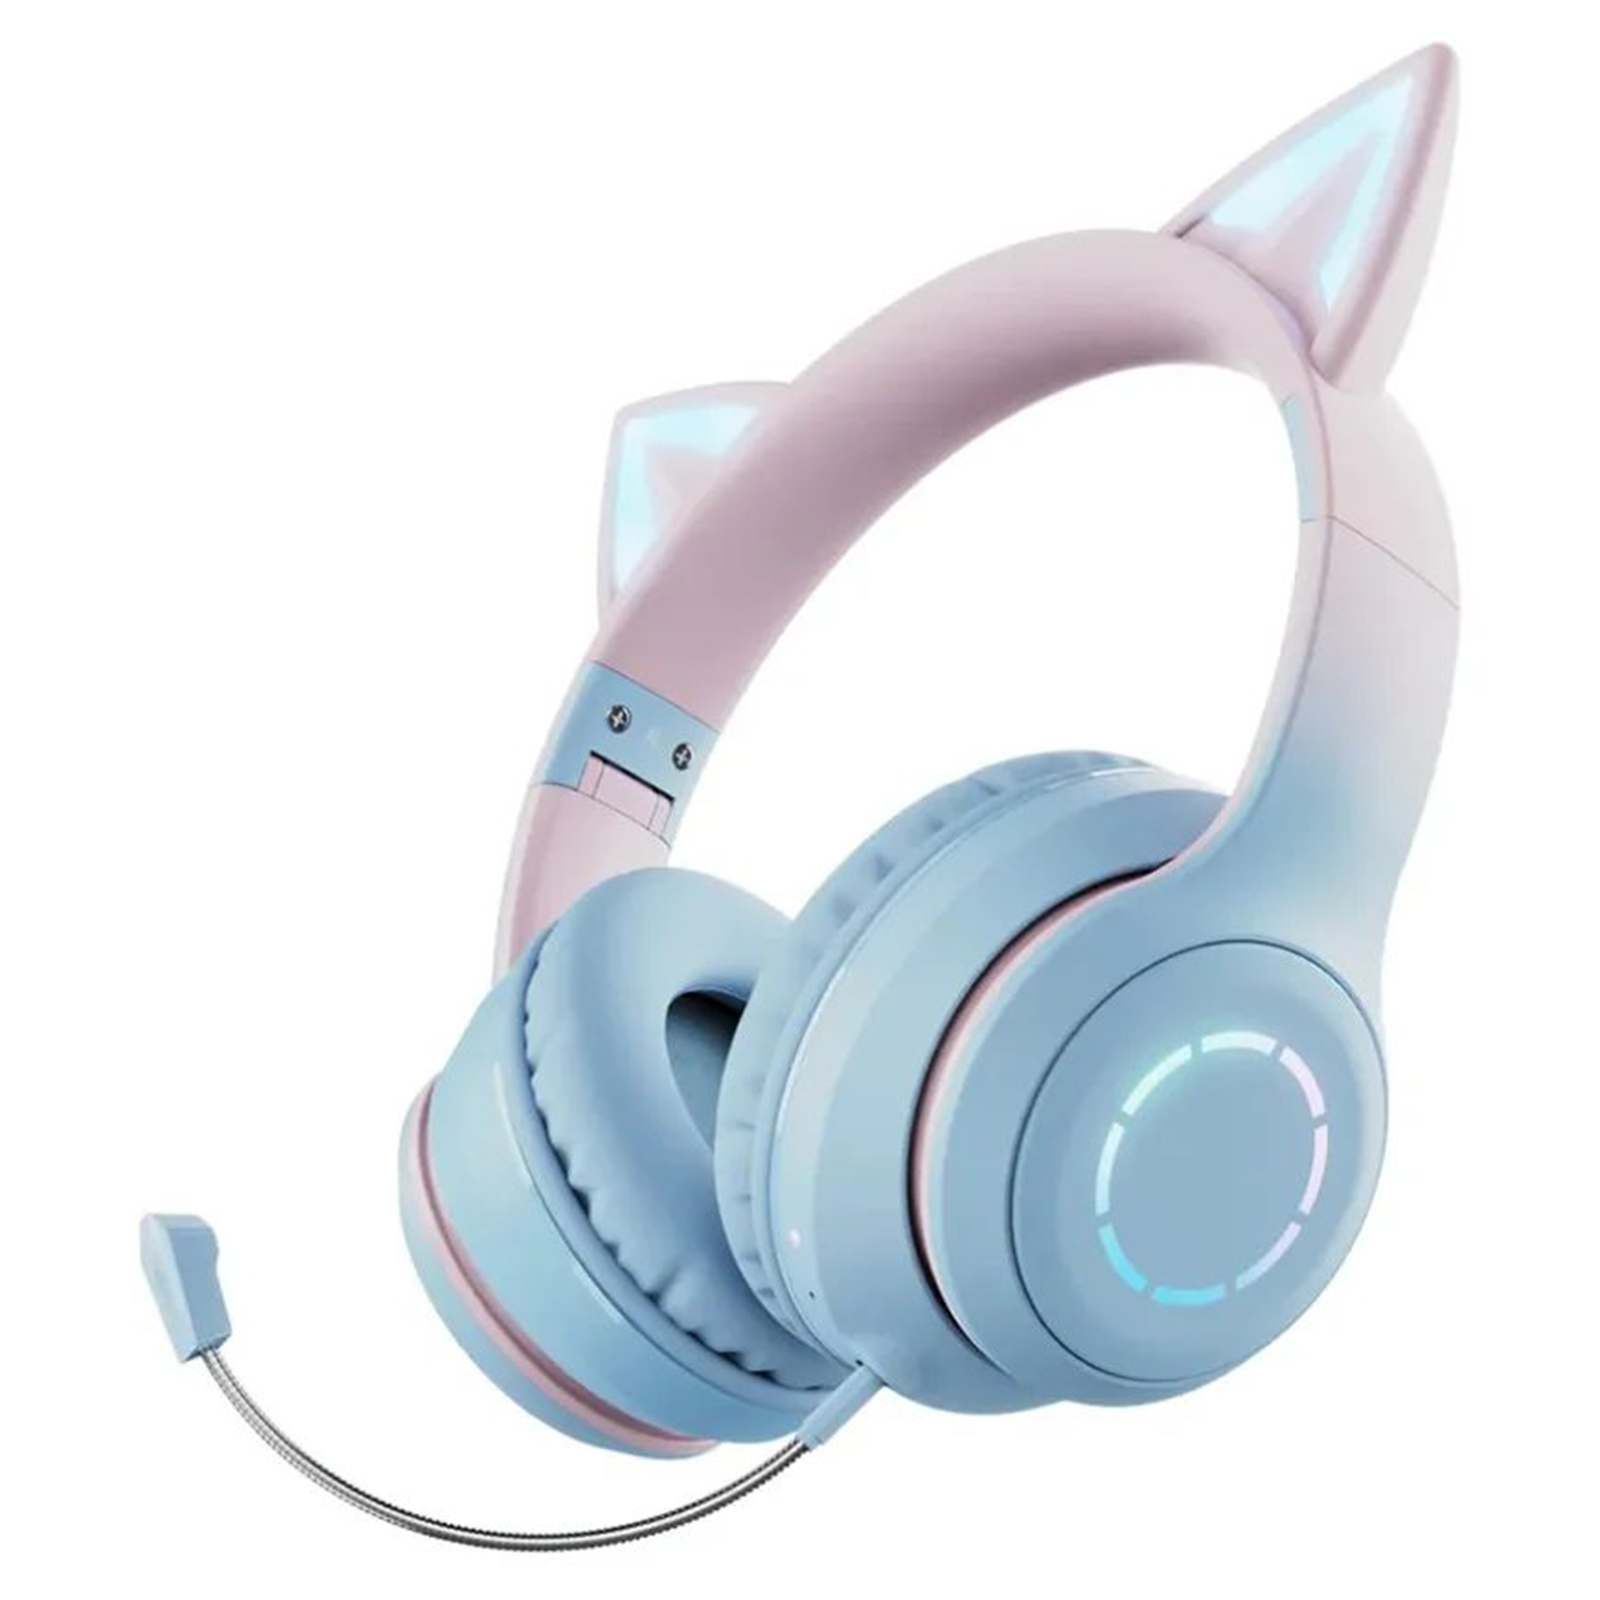 Gradient Cat Ears Noise Canceling Headset Stereo Sound Headphones Wireless Headphones With Built-in Microphone